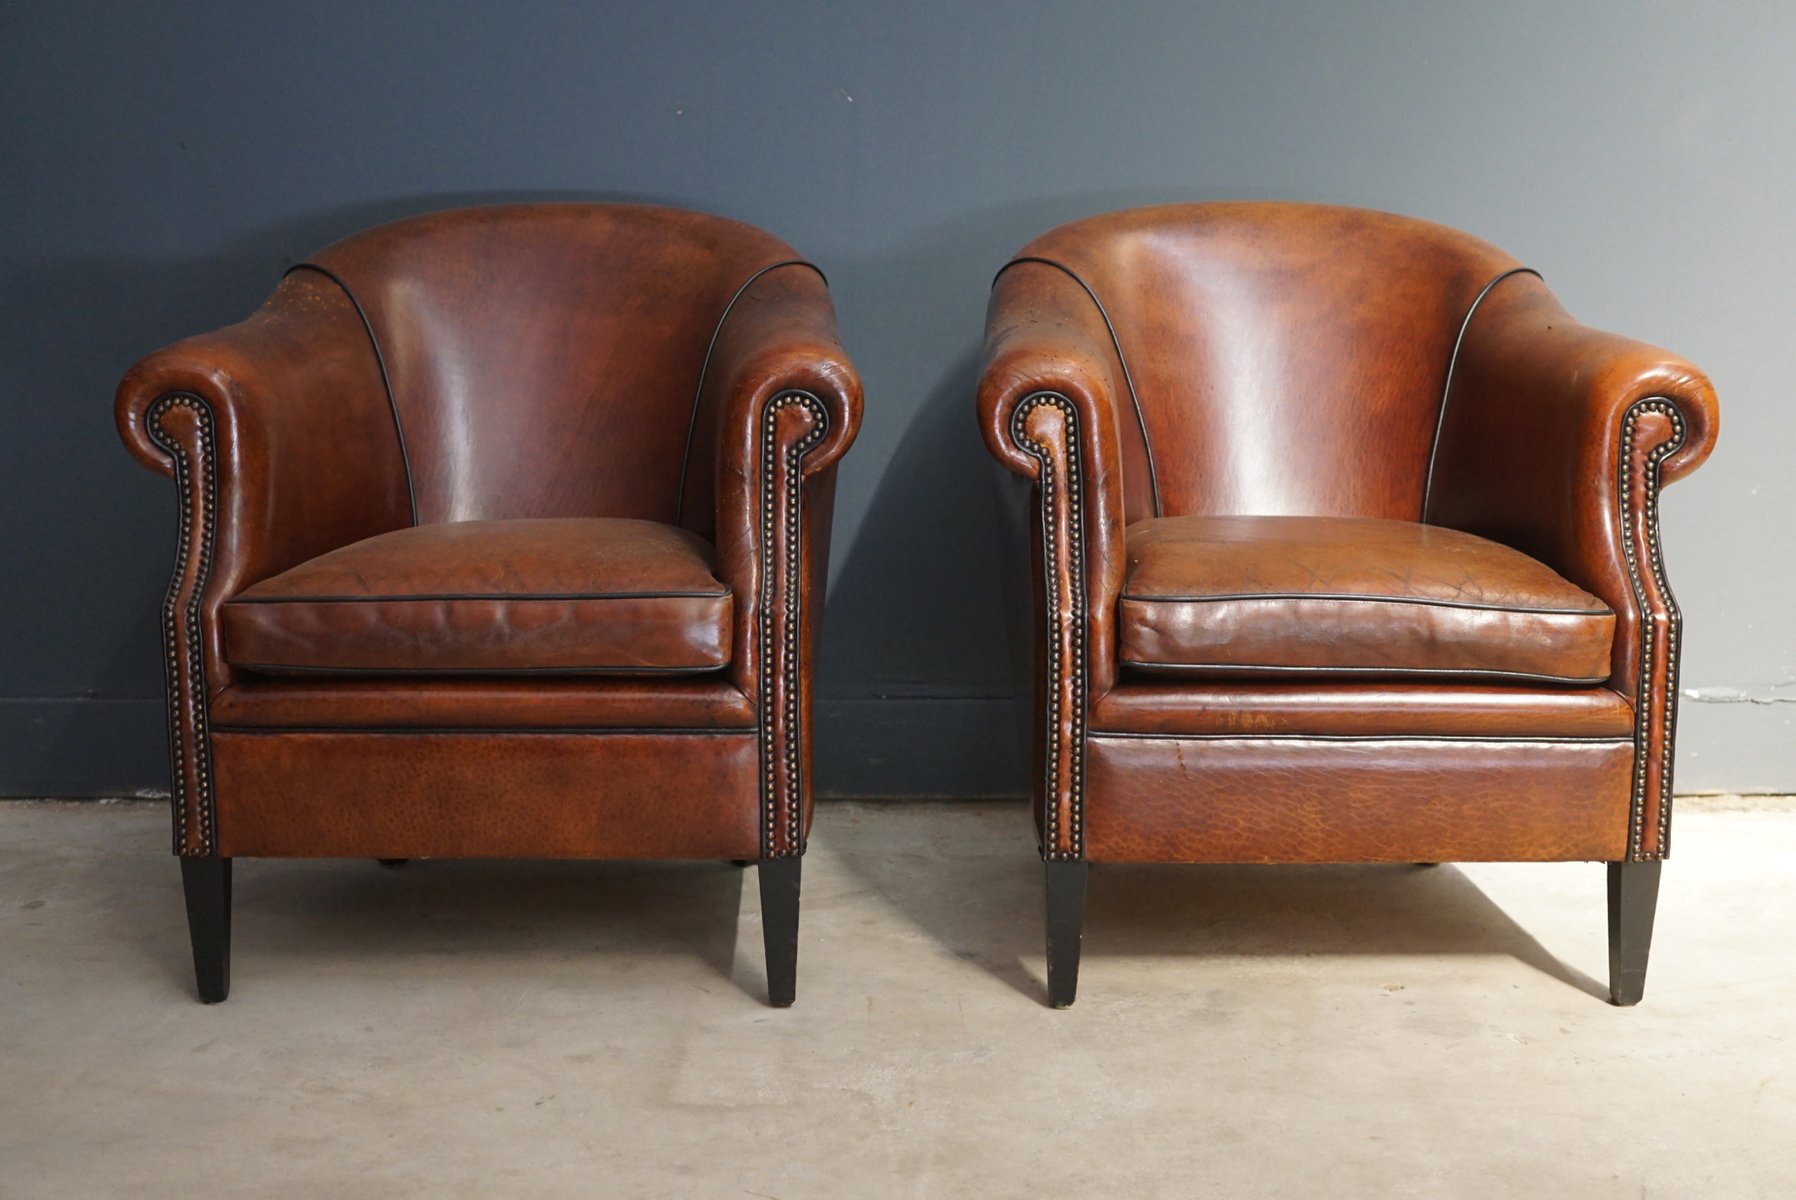 Vintage Cognac Leather Club Chairs Set of 2 for sale at 